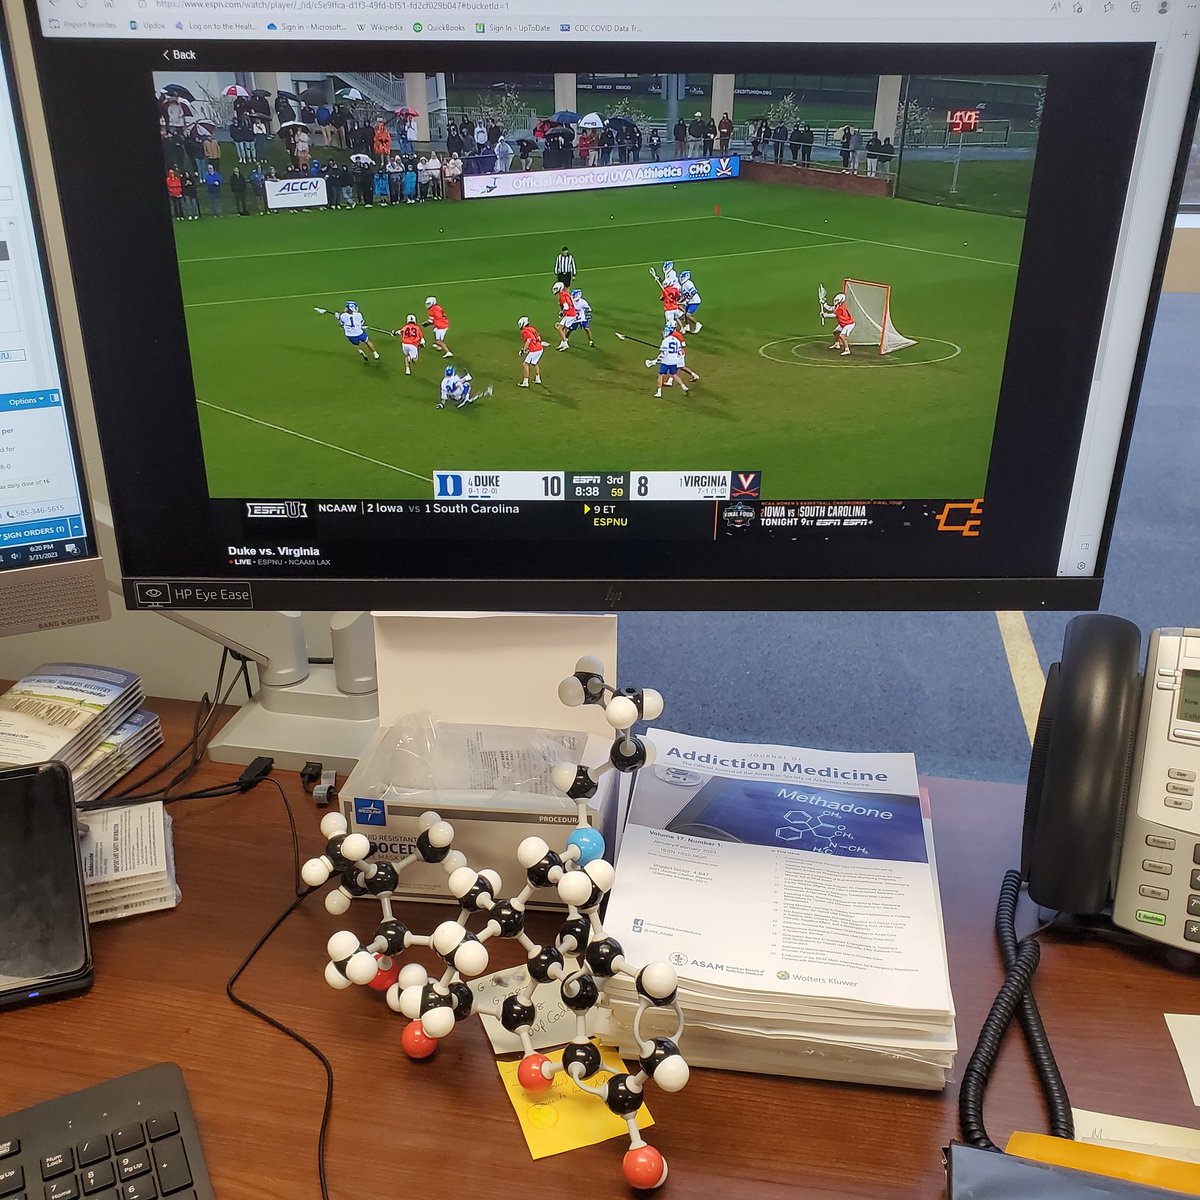 Finishing up notes at work on a Friday, the intersection of #AddictionMedicine and #Lacrosse
🥍😎🥍